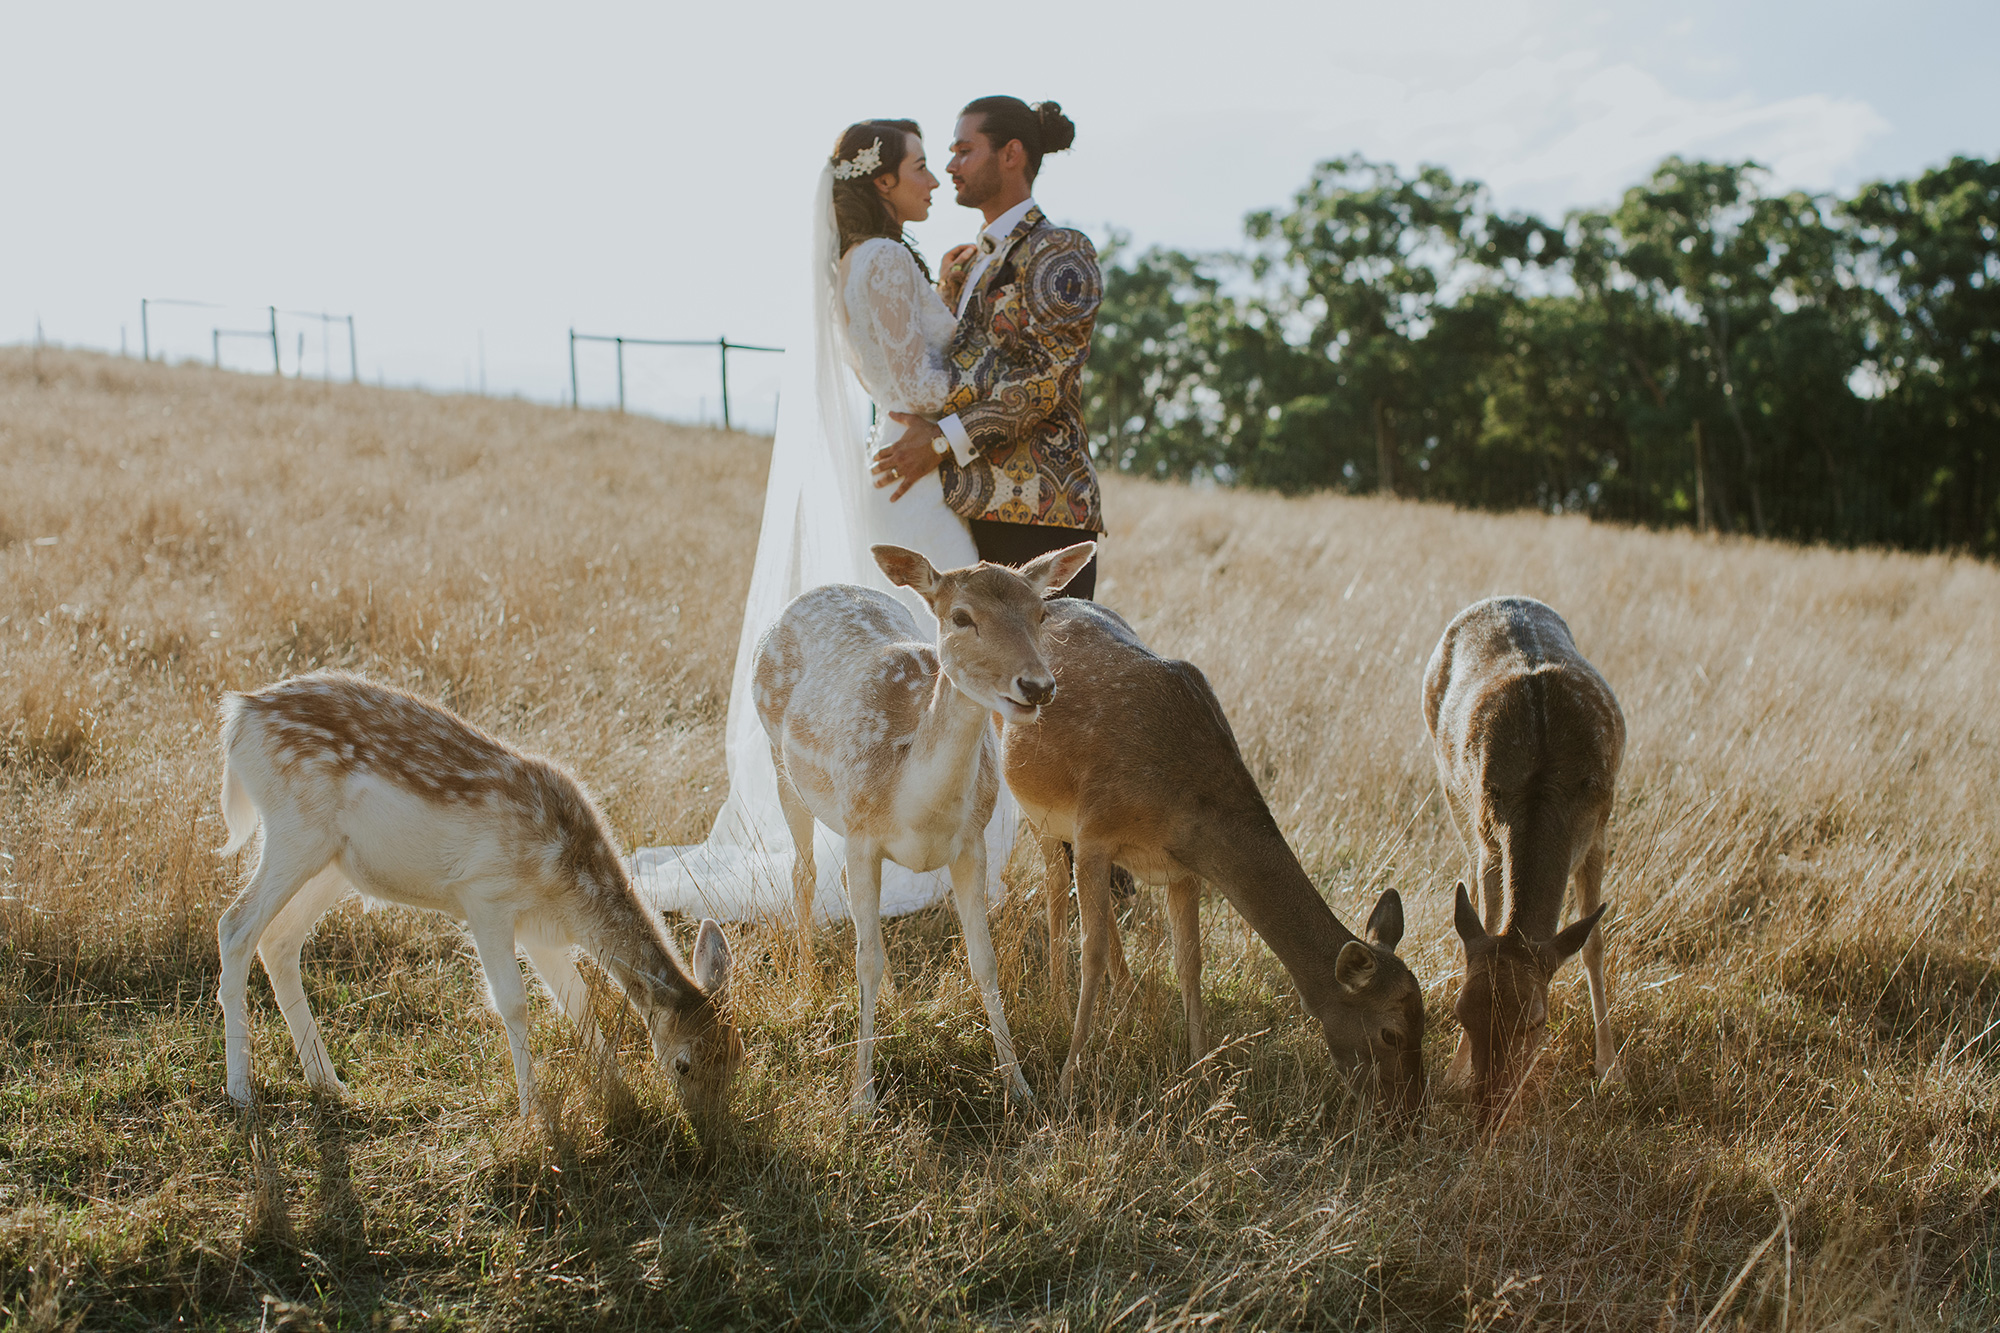 Kelly_Damian_Eclectic-Country-Wedding_Kerryn-Lee-Photography_033